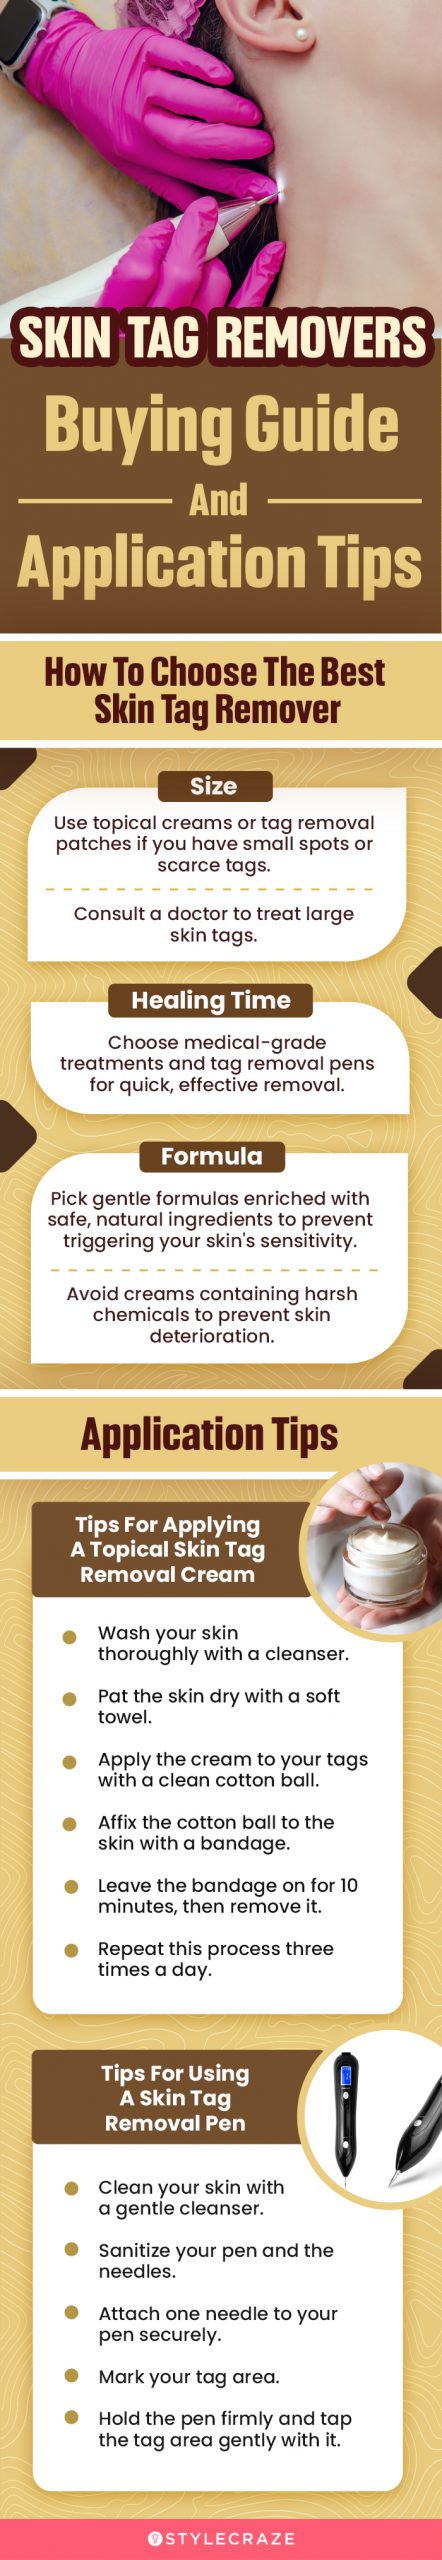 Skin Tag Removers: Buying Guide And Application Tips [infographic]